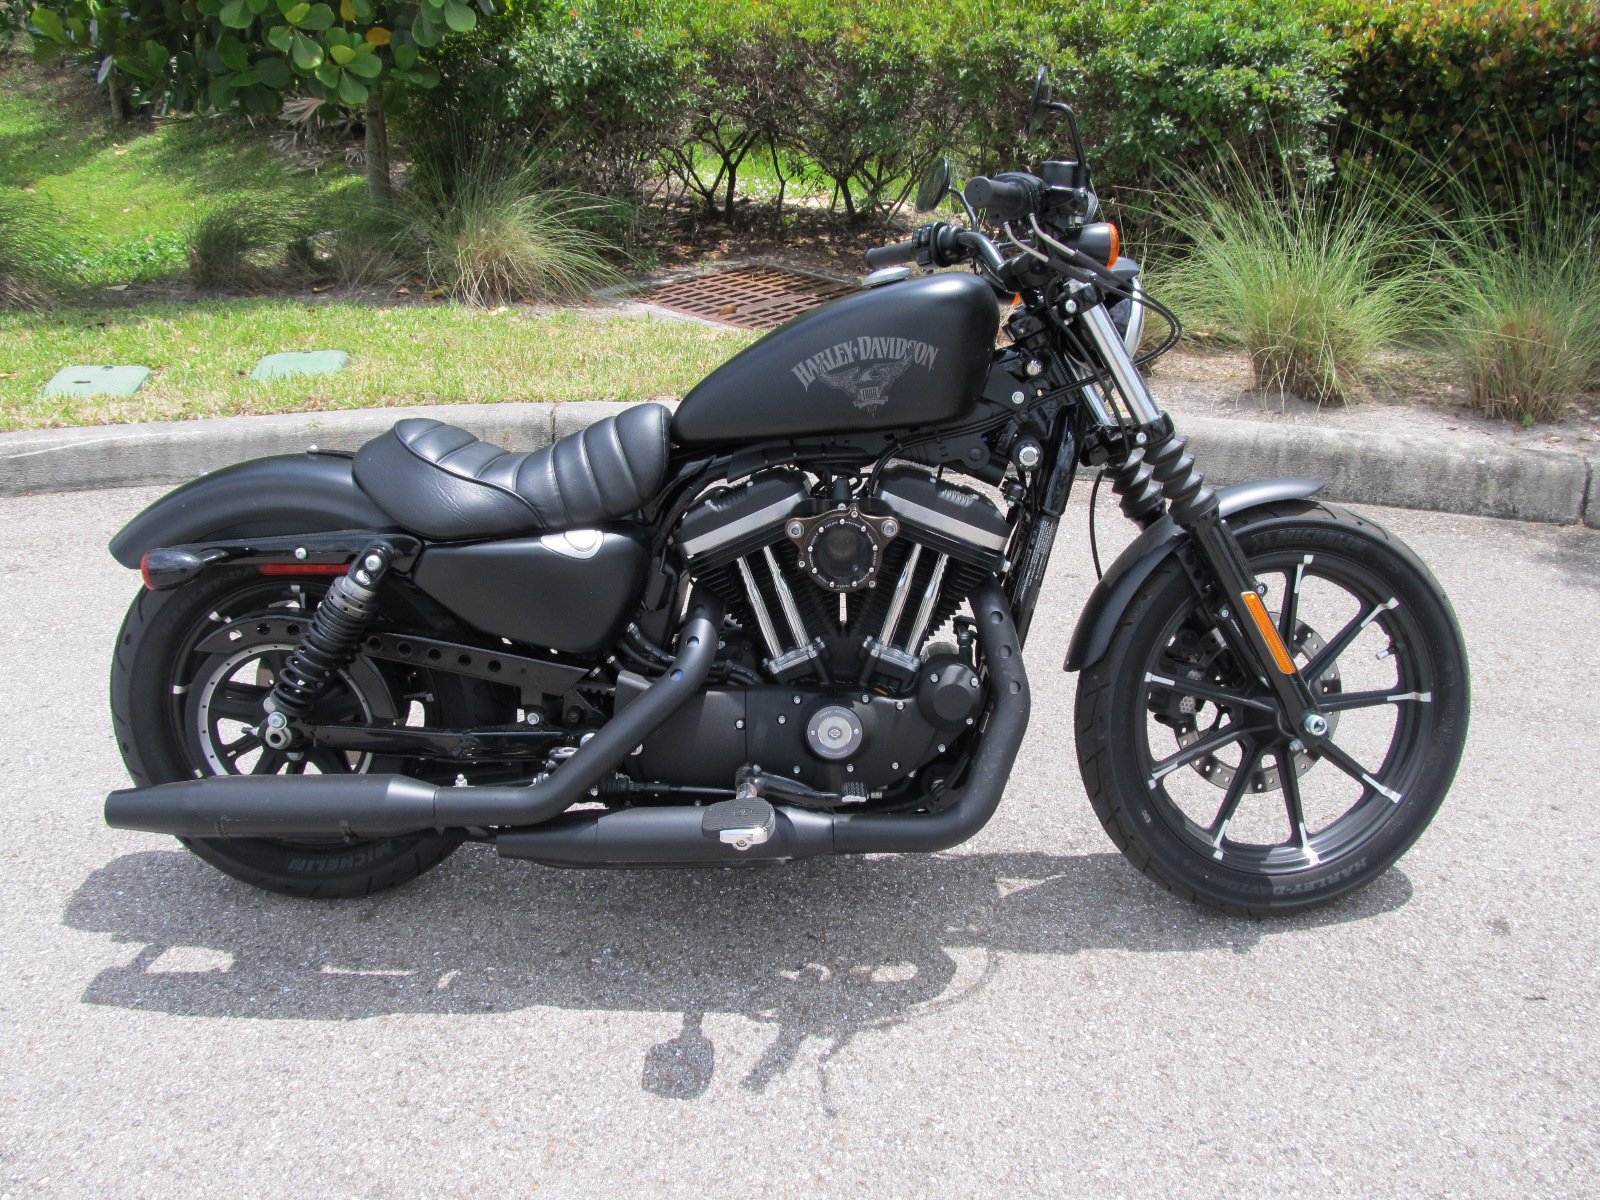 2008 Harley-Davidson XL883 Sportster 883 accident lawyers info